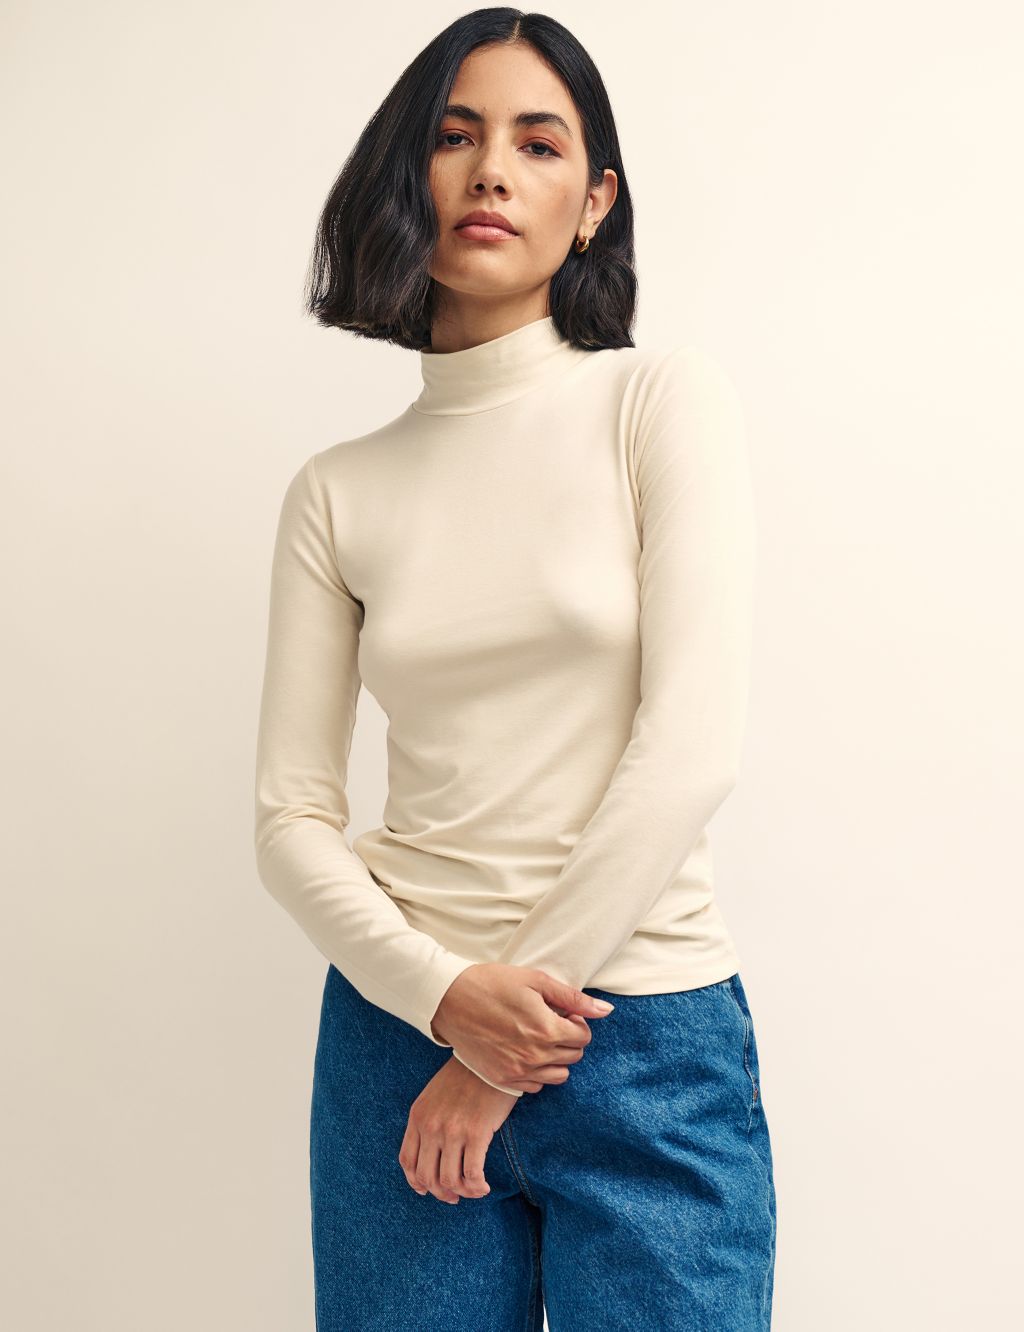 High Neck Top image 1